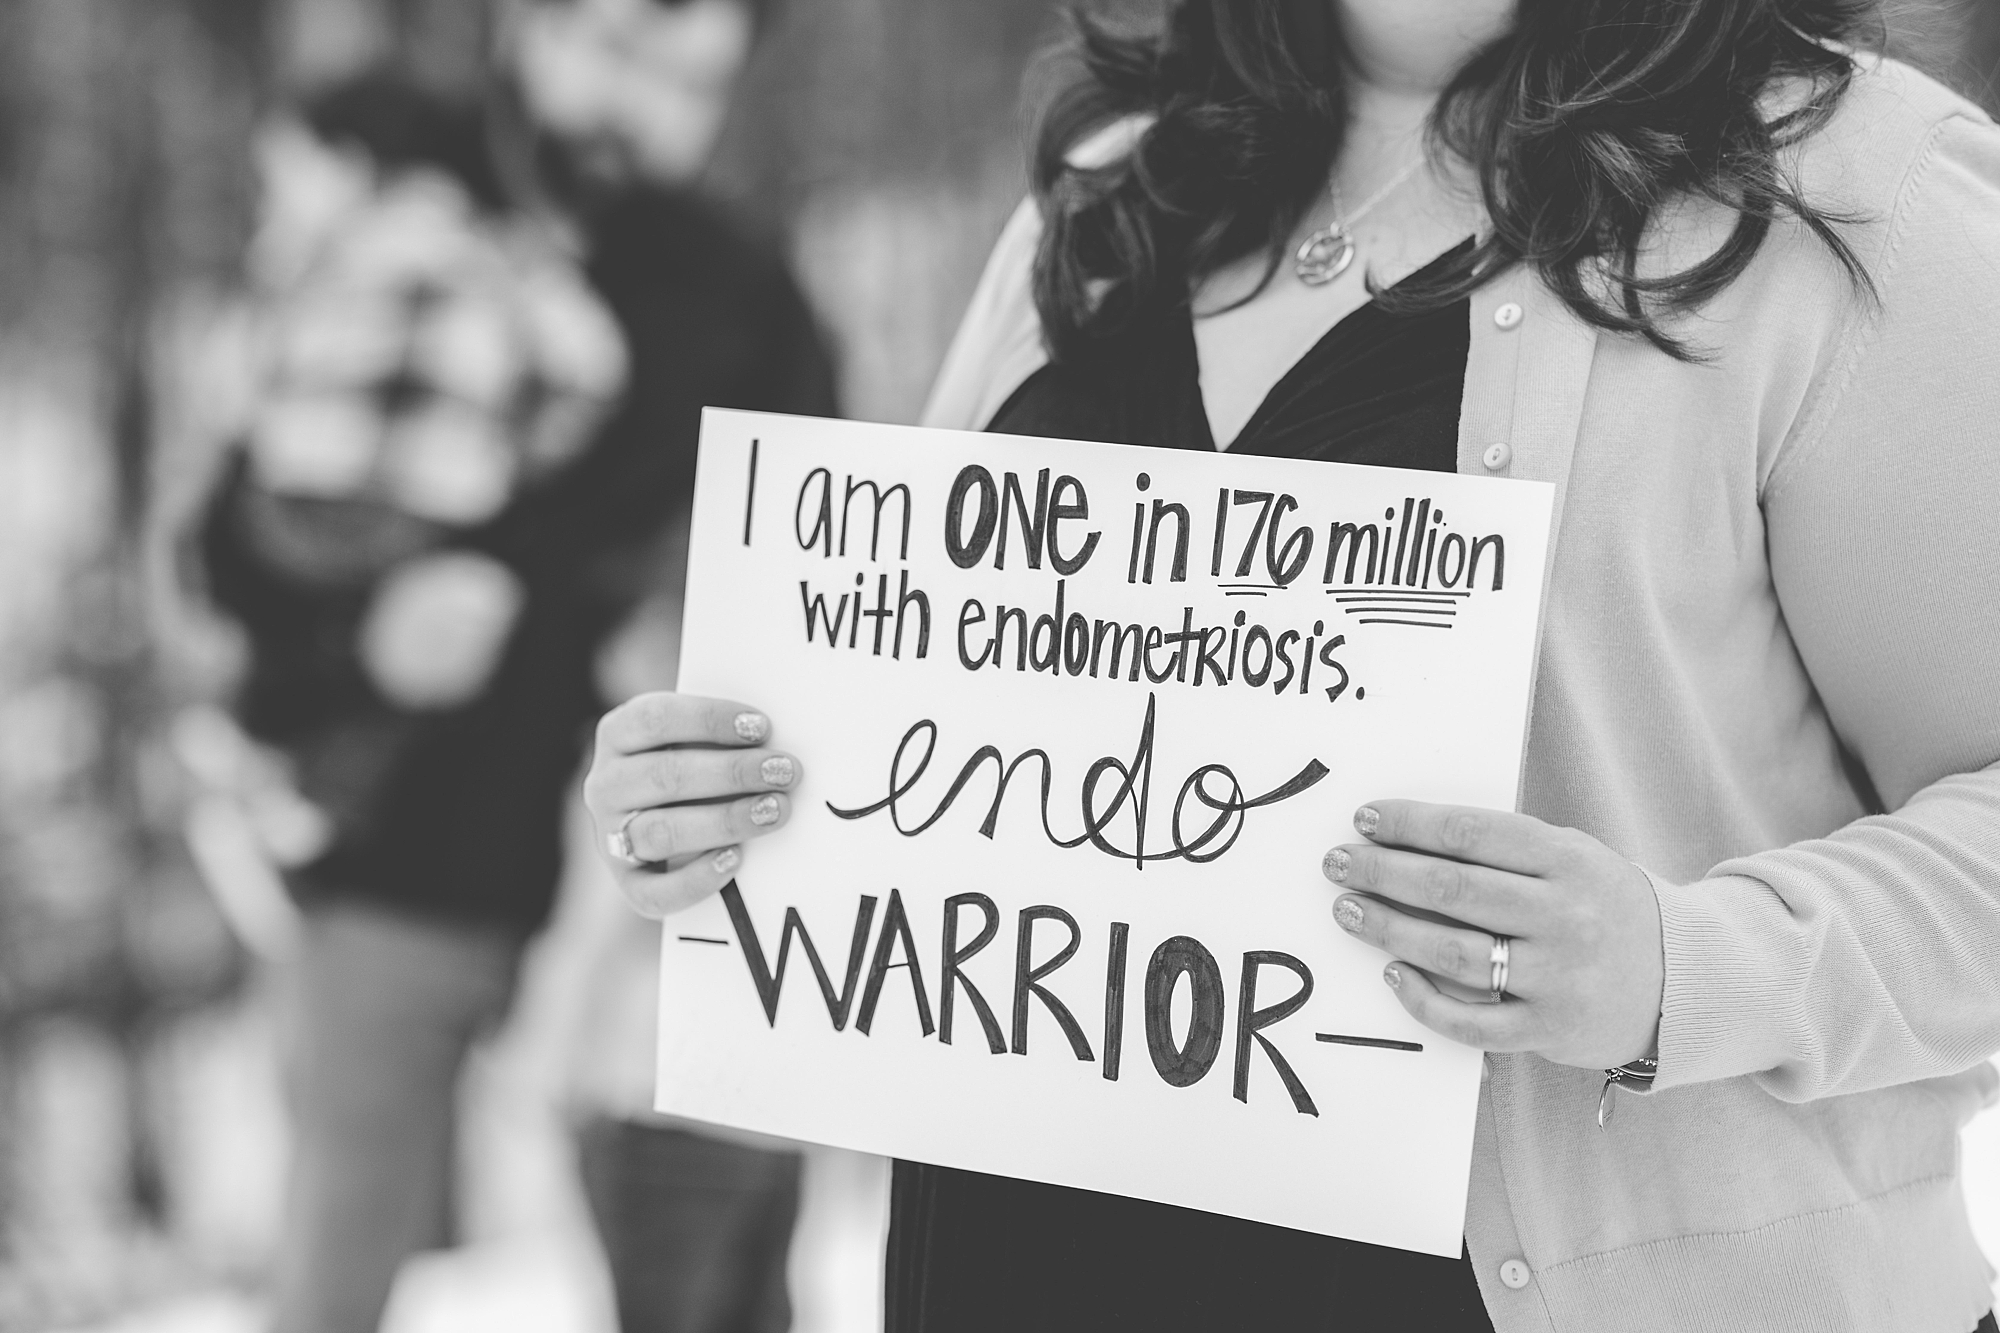 woman holds black and white sign that says "I am one in 176 million with Endometriosis"